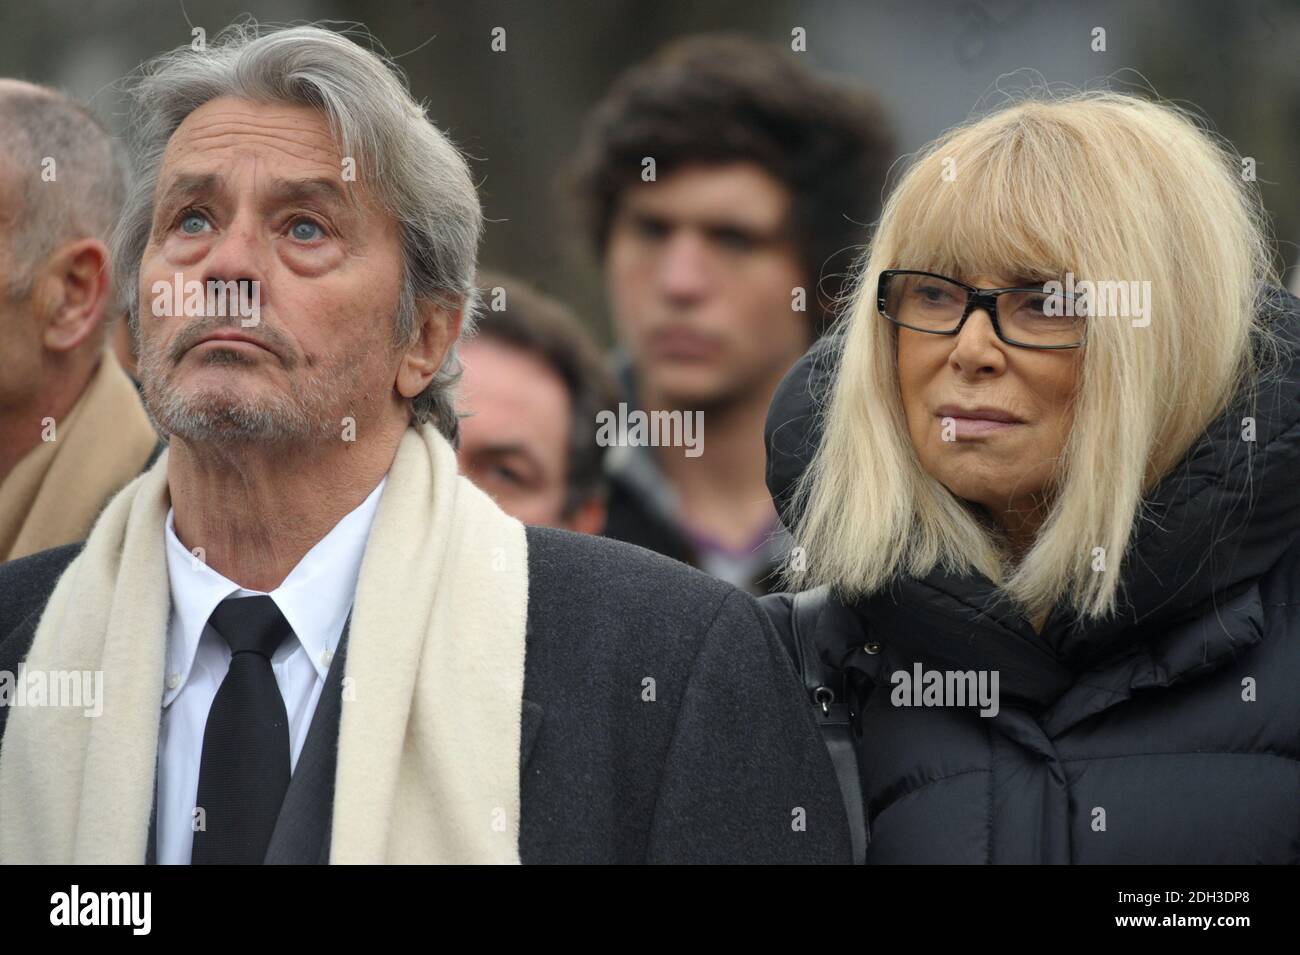 File photo - Alain Delon and Mireille Darc attending the funeral of Georges Cravenne who died aged 94, at the Montparnasse cemetery, in Paris, France, on January 14, 2009. Darc died at 79 it was announced today. She was Alain Delon's longtime co-star and companion. She appeared as a lead character in Jean-Luc Godard's 1967 film Week End. Photo by ABACAPRESS.COM Stock Photo